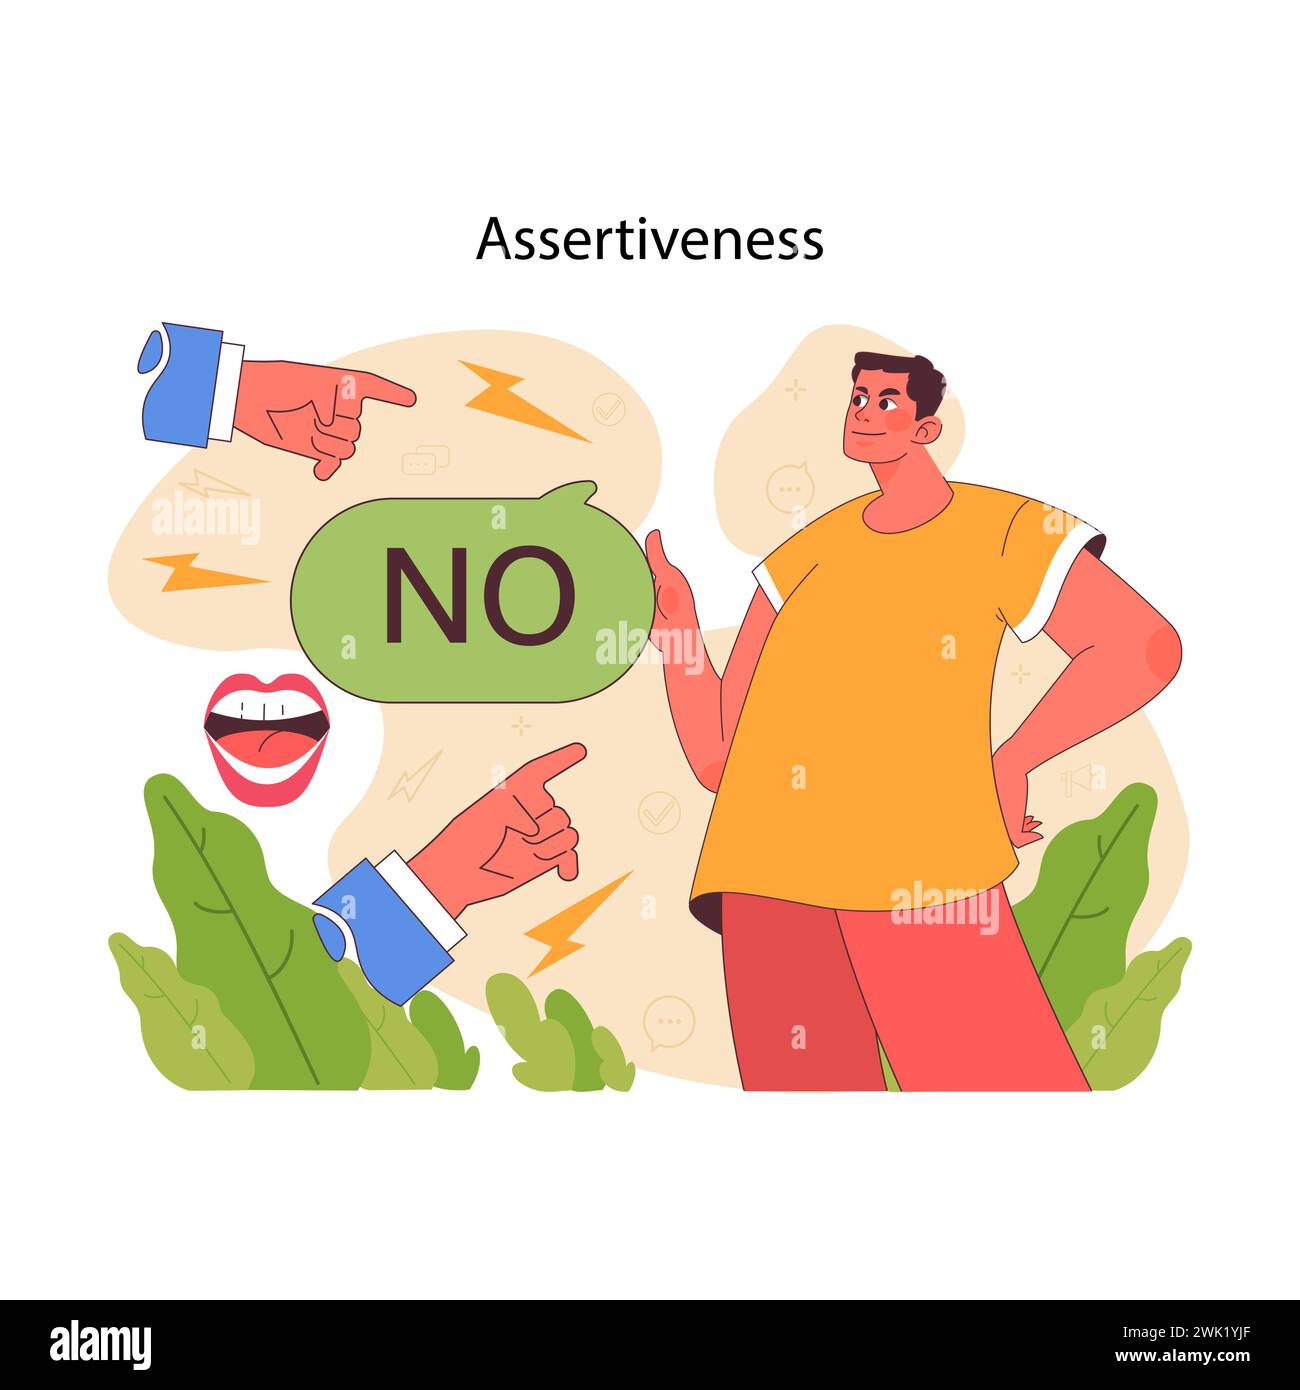 Assertiveness concept. Young man confidently expresses boundary with firm rejection to aggressive people pointing fingers. Importance of clear communication and self-respect. Flat vector illustration Stock Vector